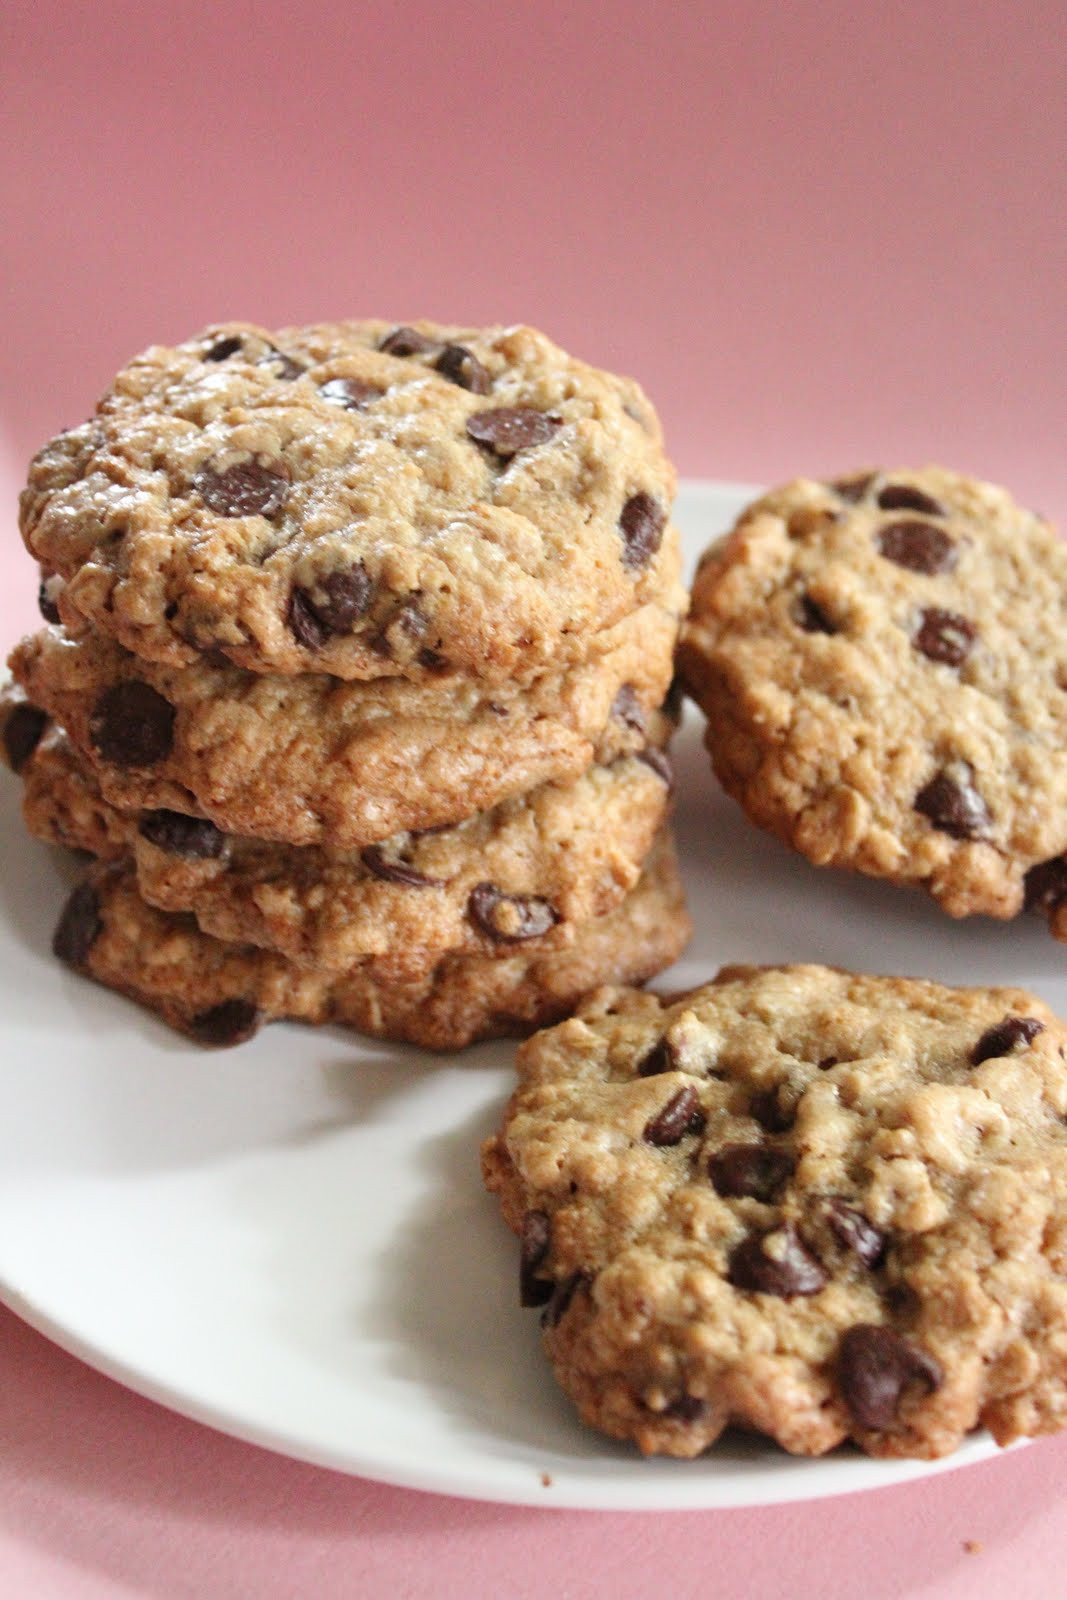 Chocolate Chip Oatmeal Cookies Healthy
 Ultimate healthier oatmeal and chocolate chip cookies